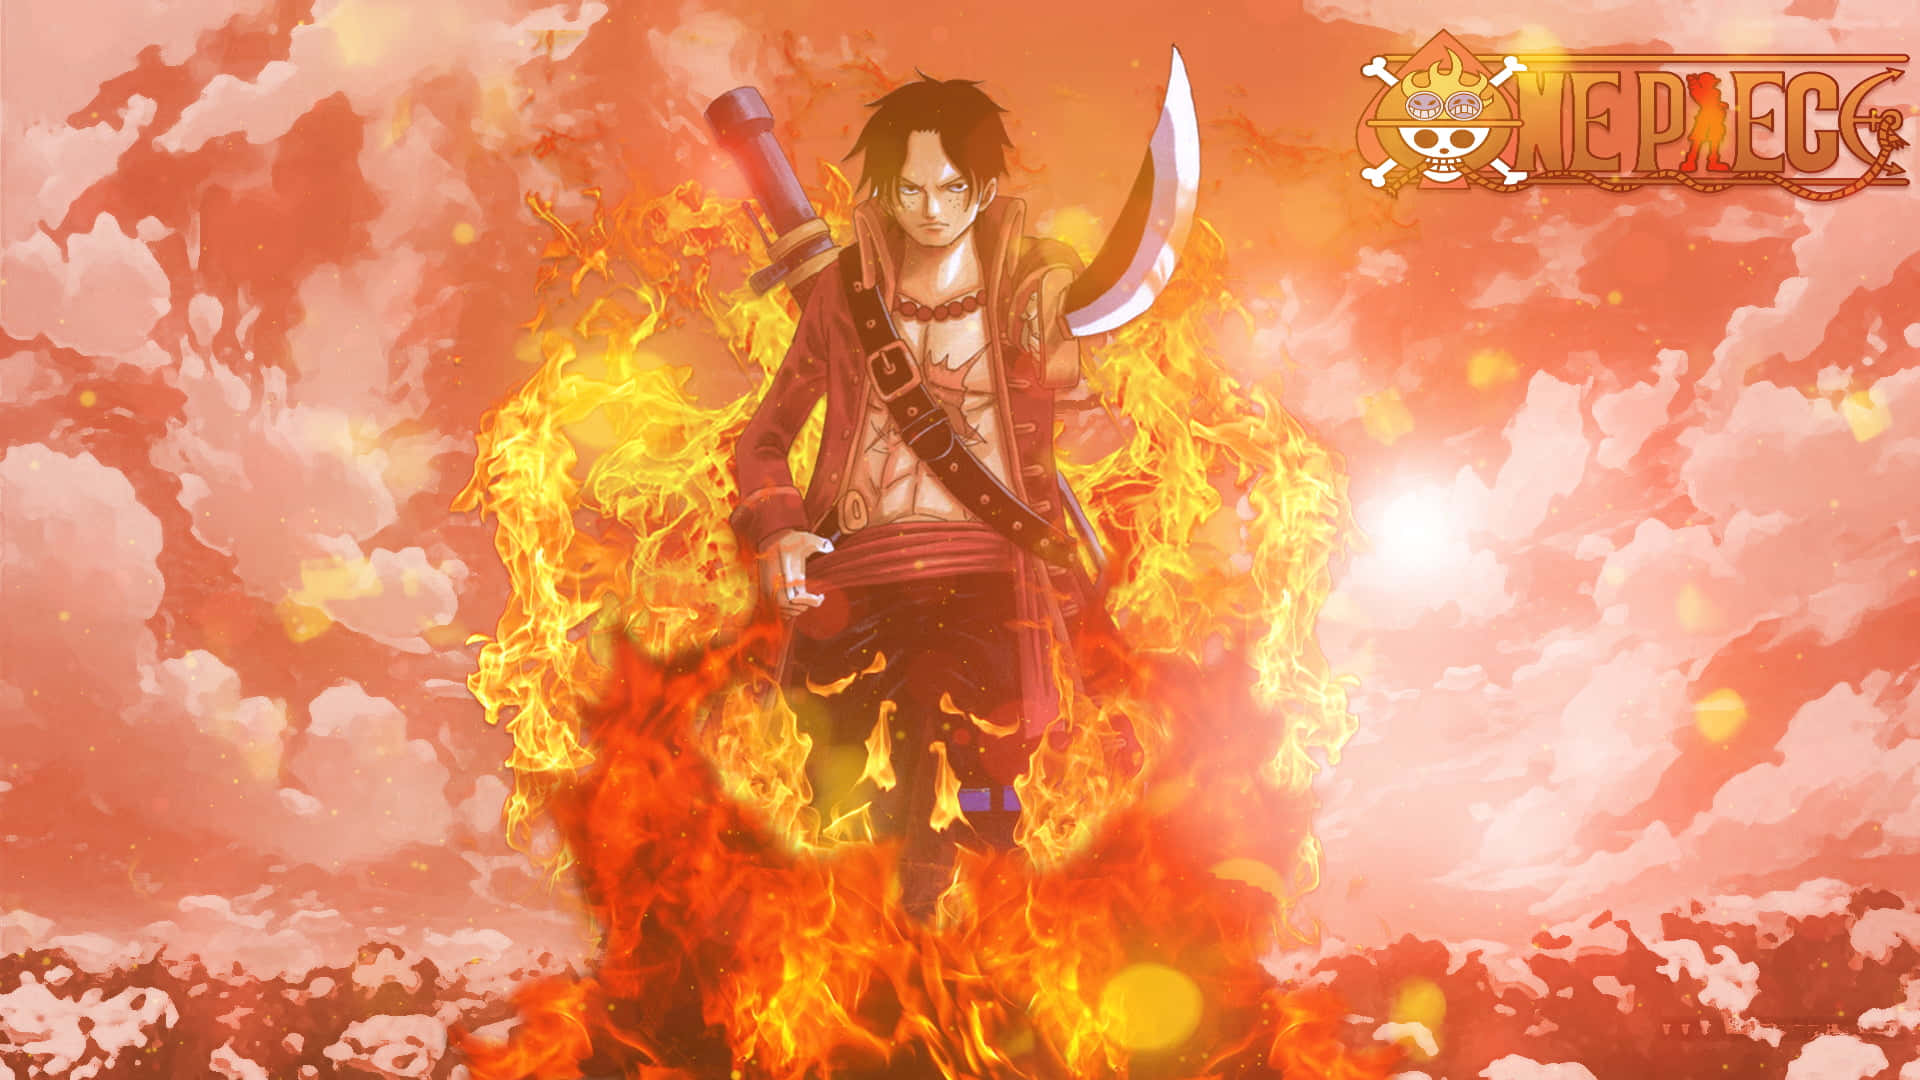 Portgas D Ace, The Fiery Pirate From One Piece. Background